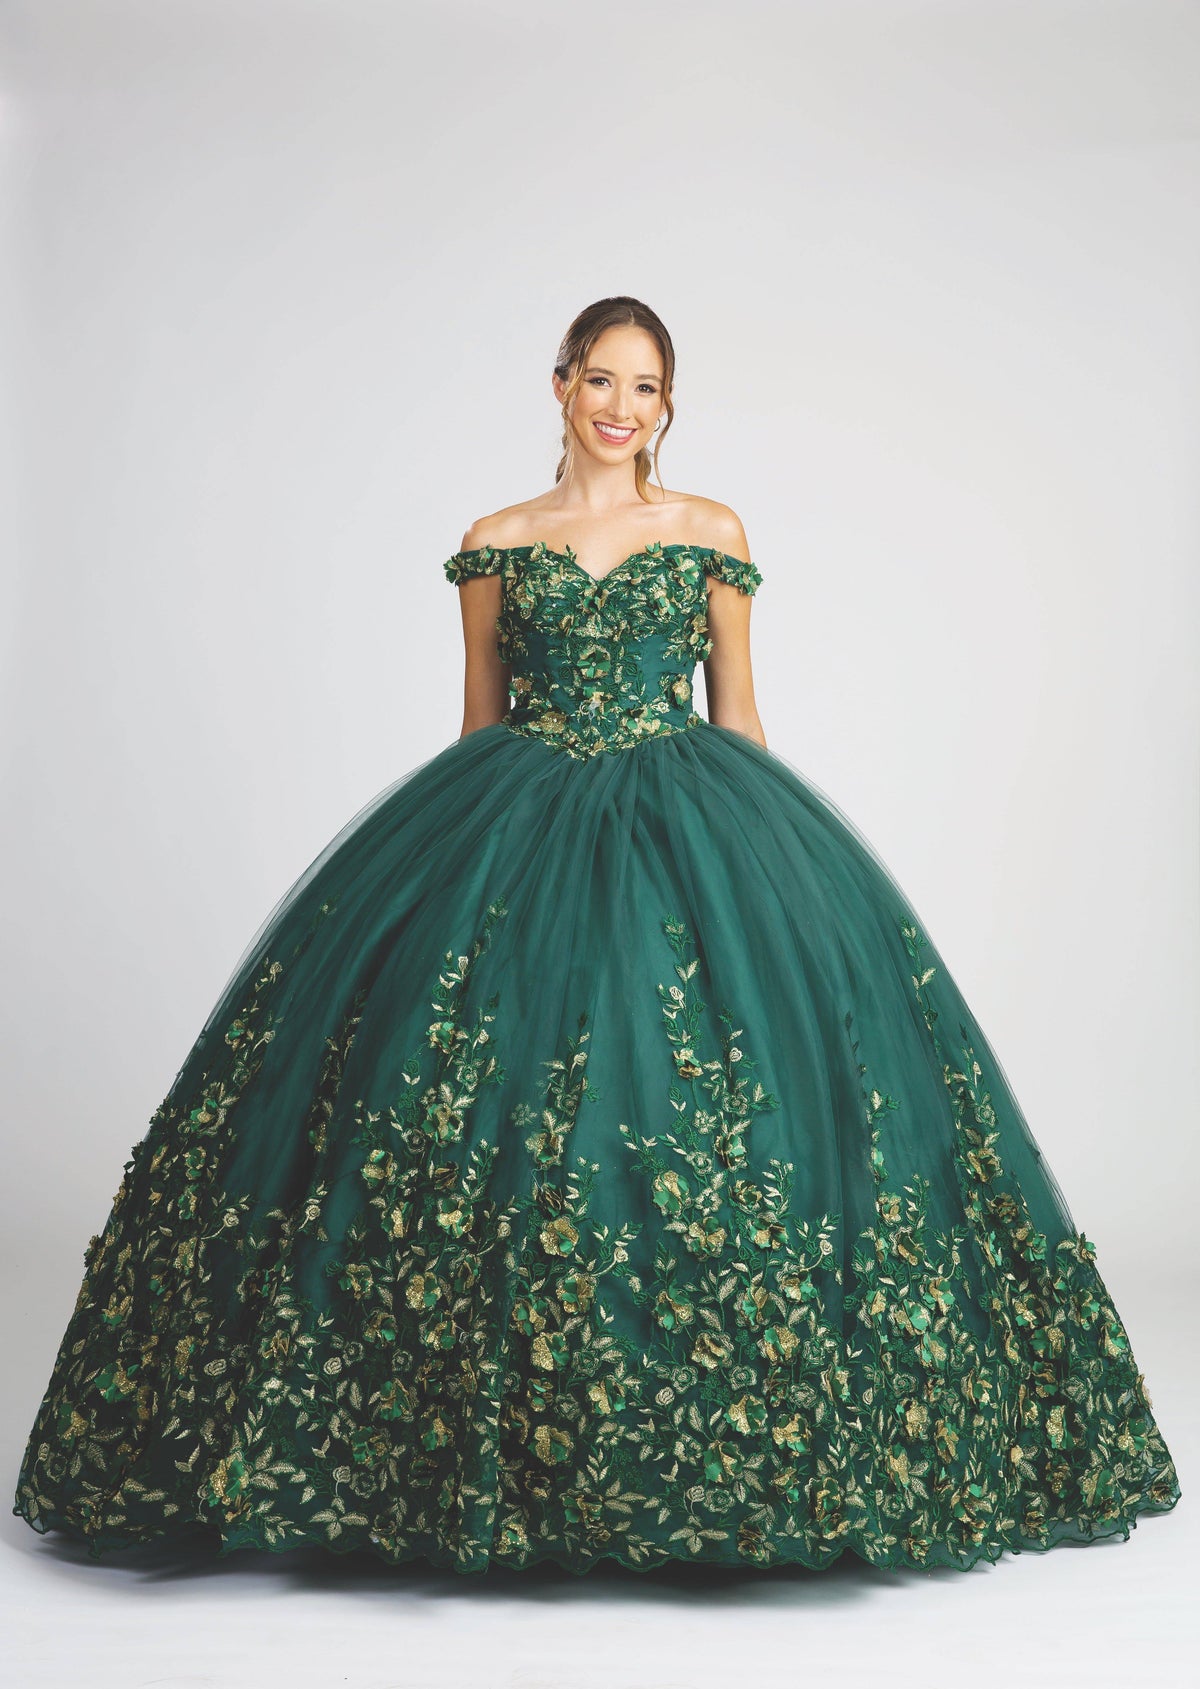 Fiesta 10273 Floral Off Shoulder Quinceanera Ball Gown - NORMA REED